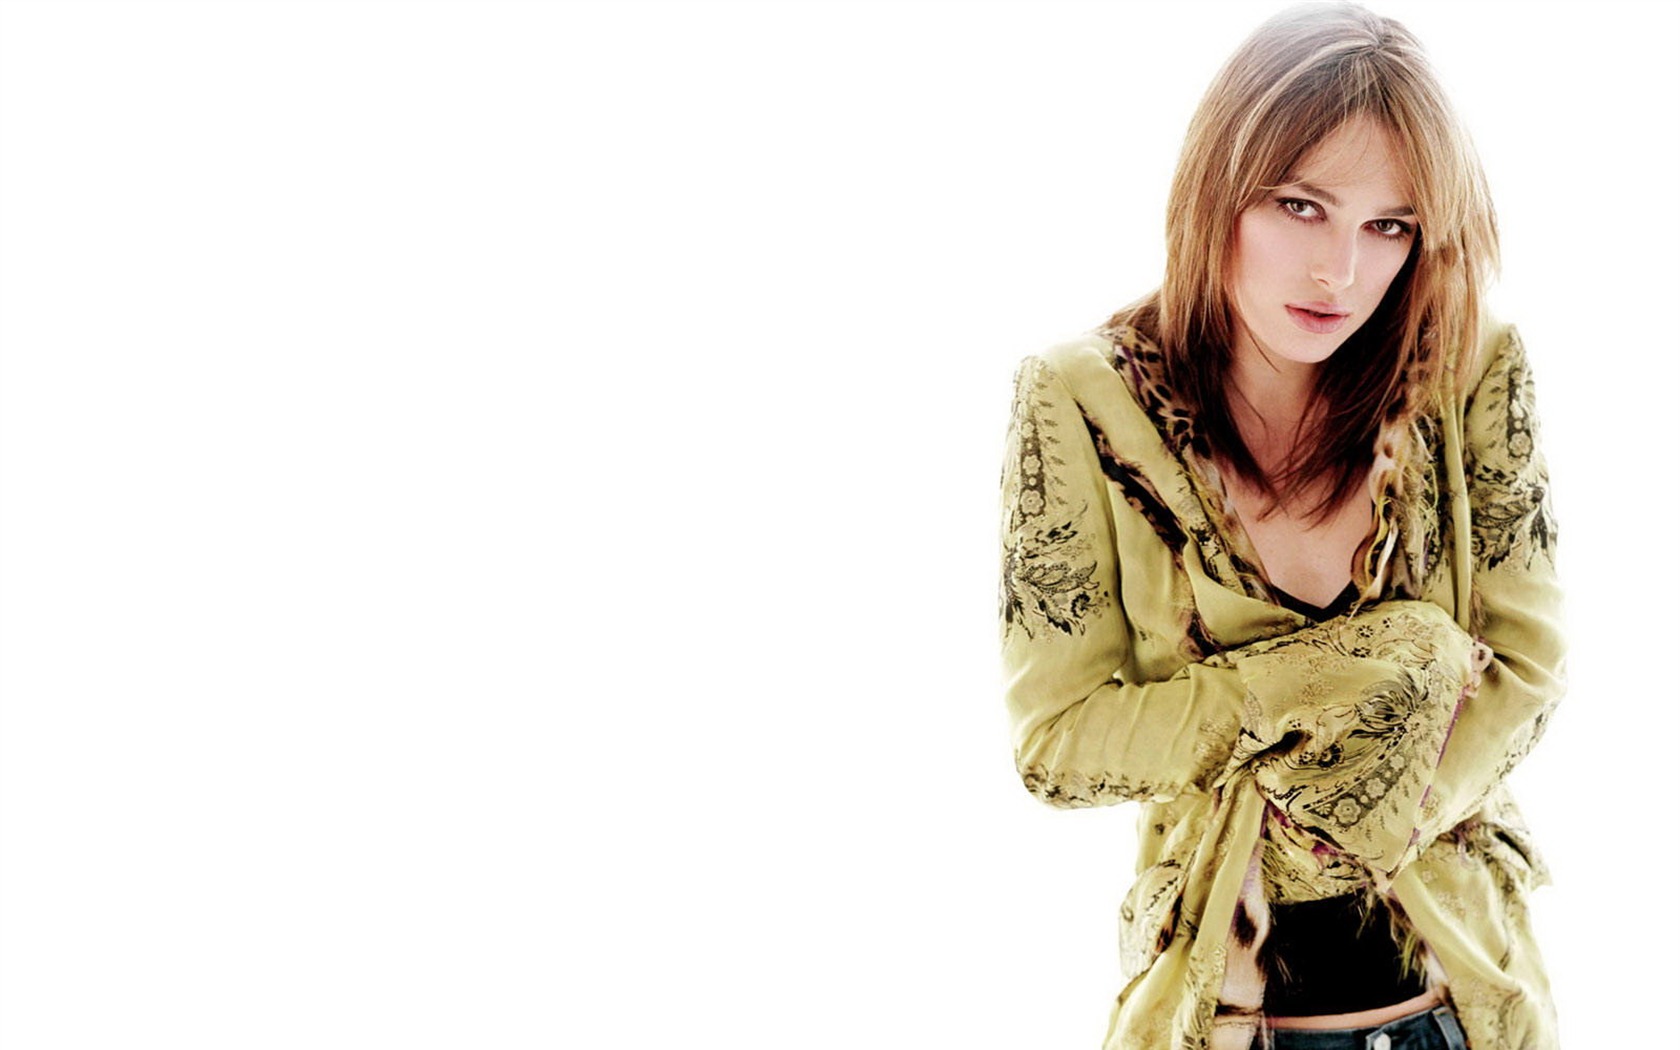 Keira Knightley #047 - 1680x1050 Wallpapers Pictures Photos Images